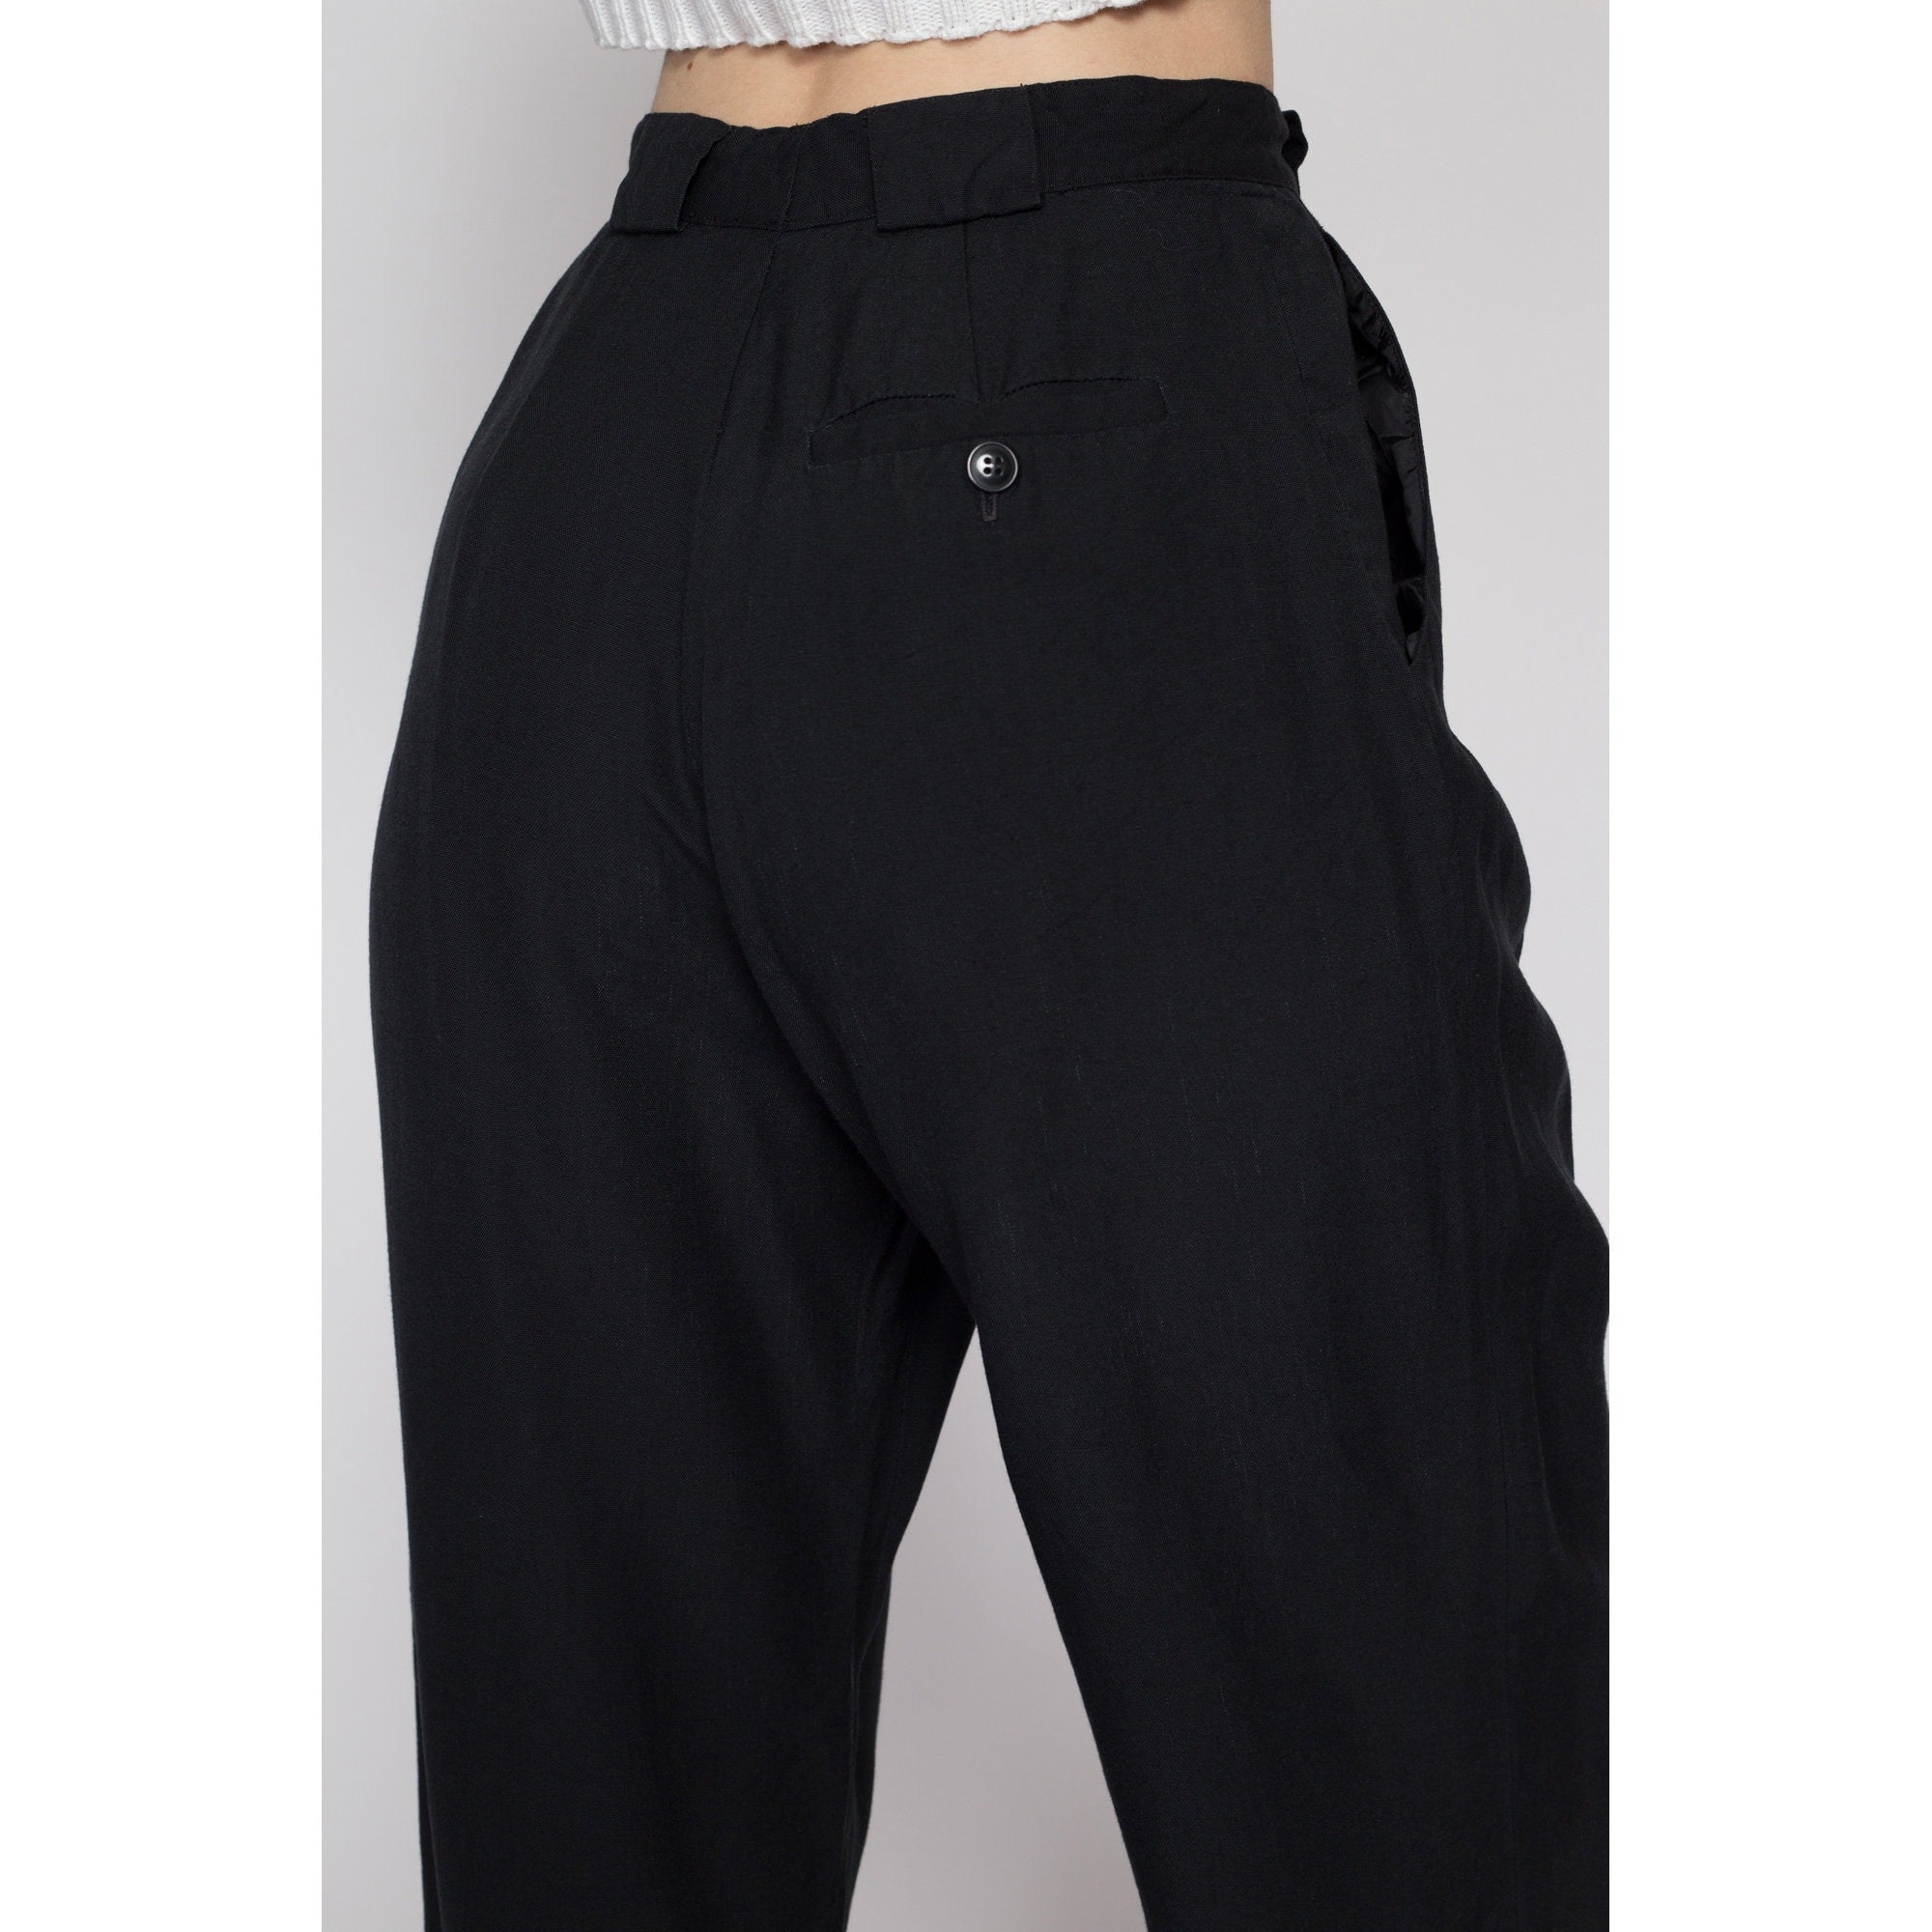 Black Pleated Wide-Leg Trousers with Waistband